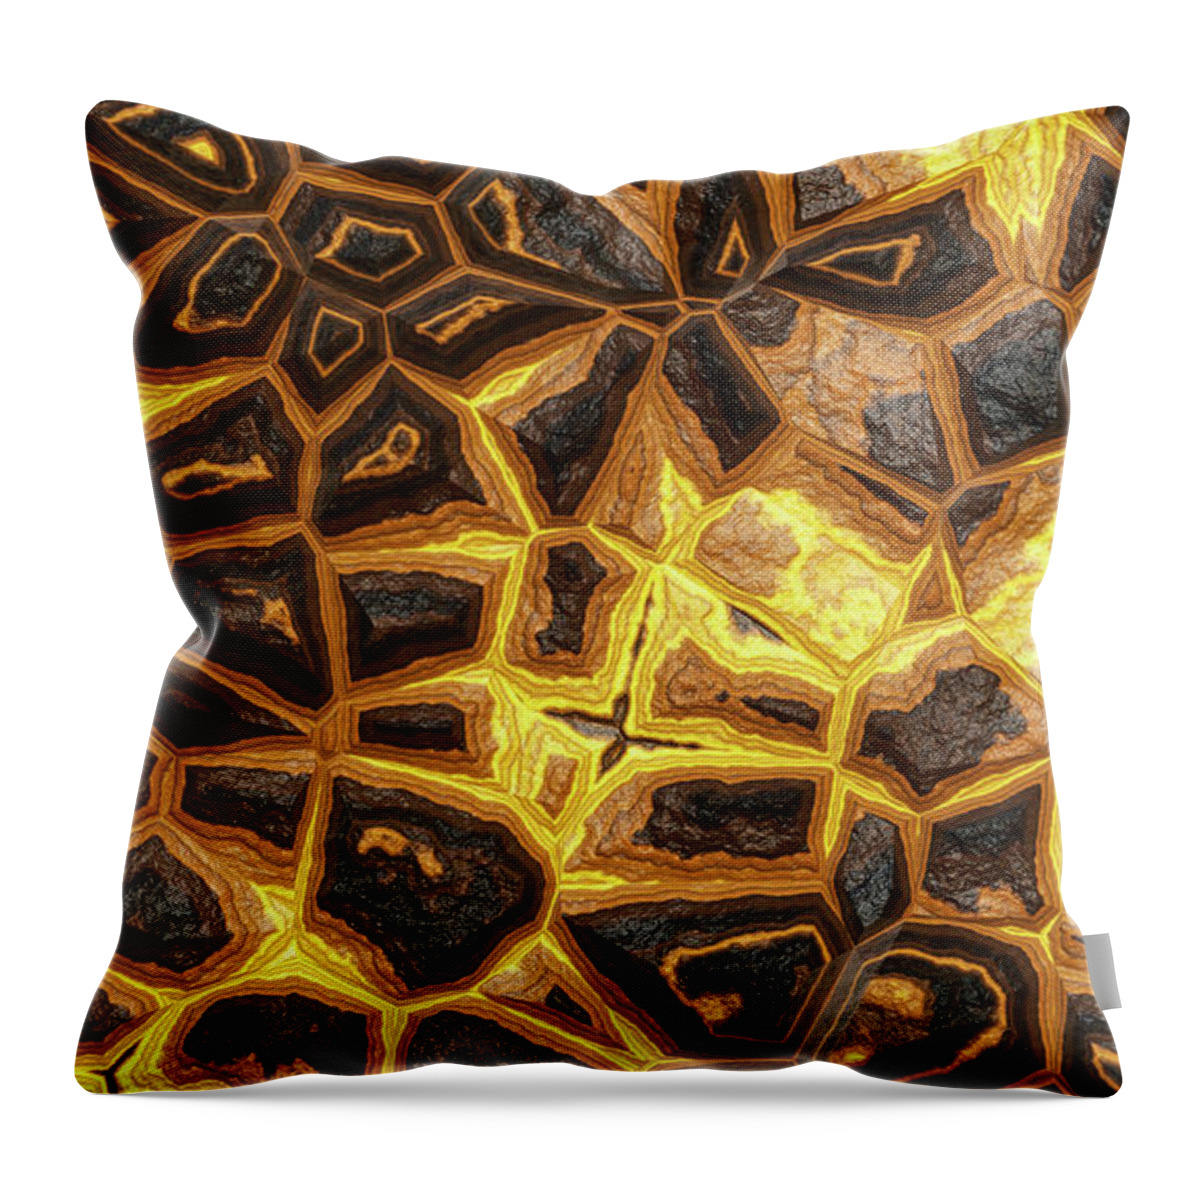 Rock Wall Throw Pillow featuring the digital art Flower Stone Wall #1 by Don Northup